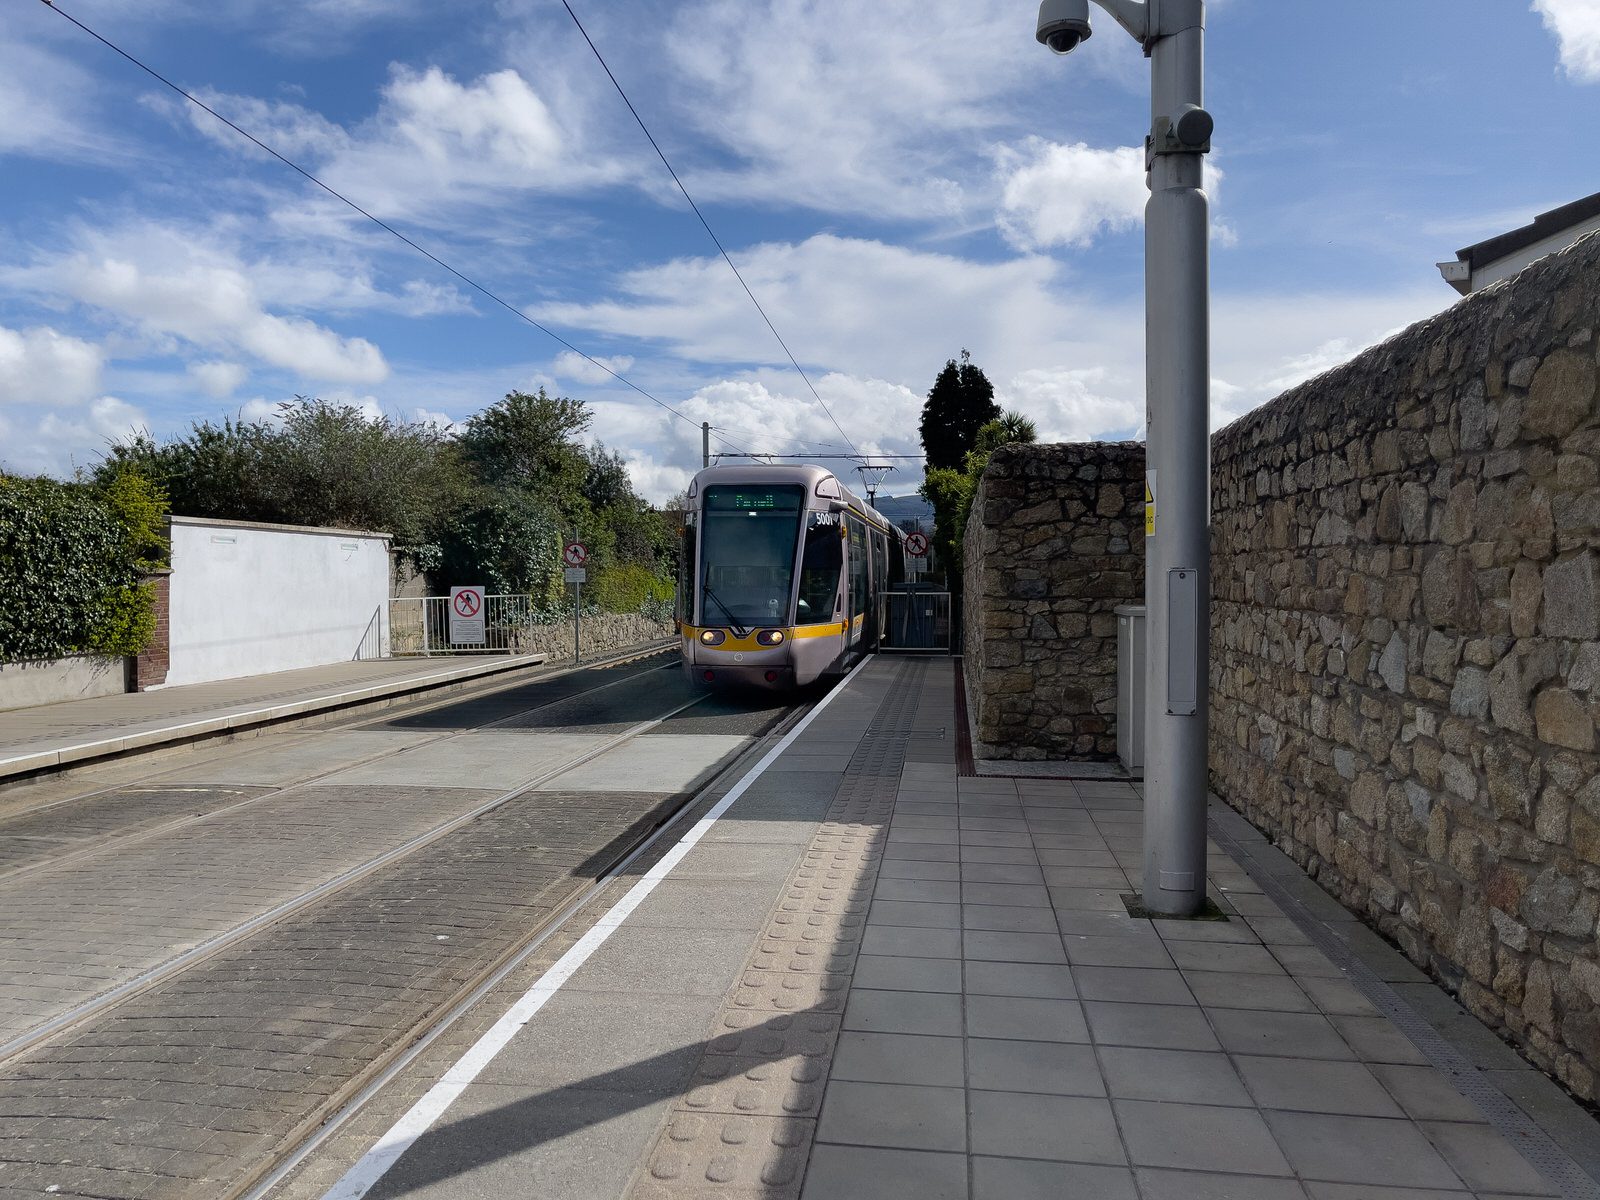 THE LUAS TRAM STOP AT WINDY ARBOUR AND THE IMMEDIATE AREA 043